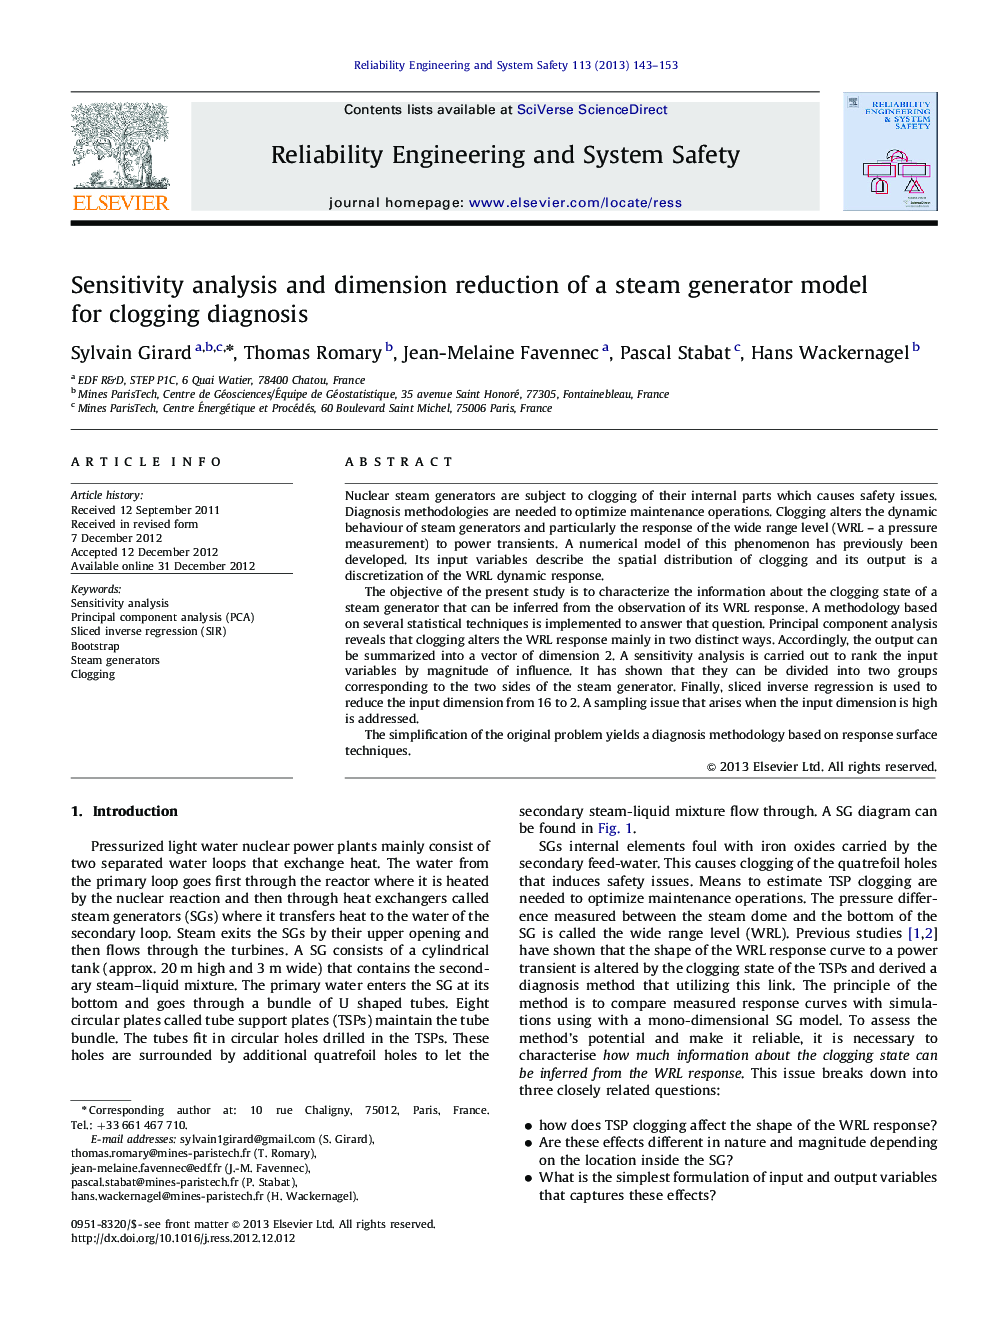 Sensitivity analysis and dimension reduction of a steam generator model for clogging diagnosis